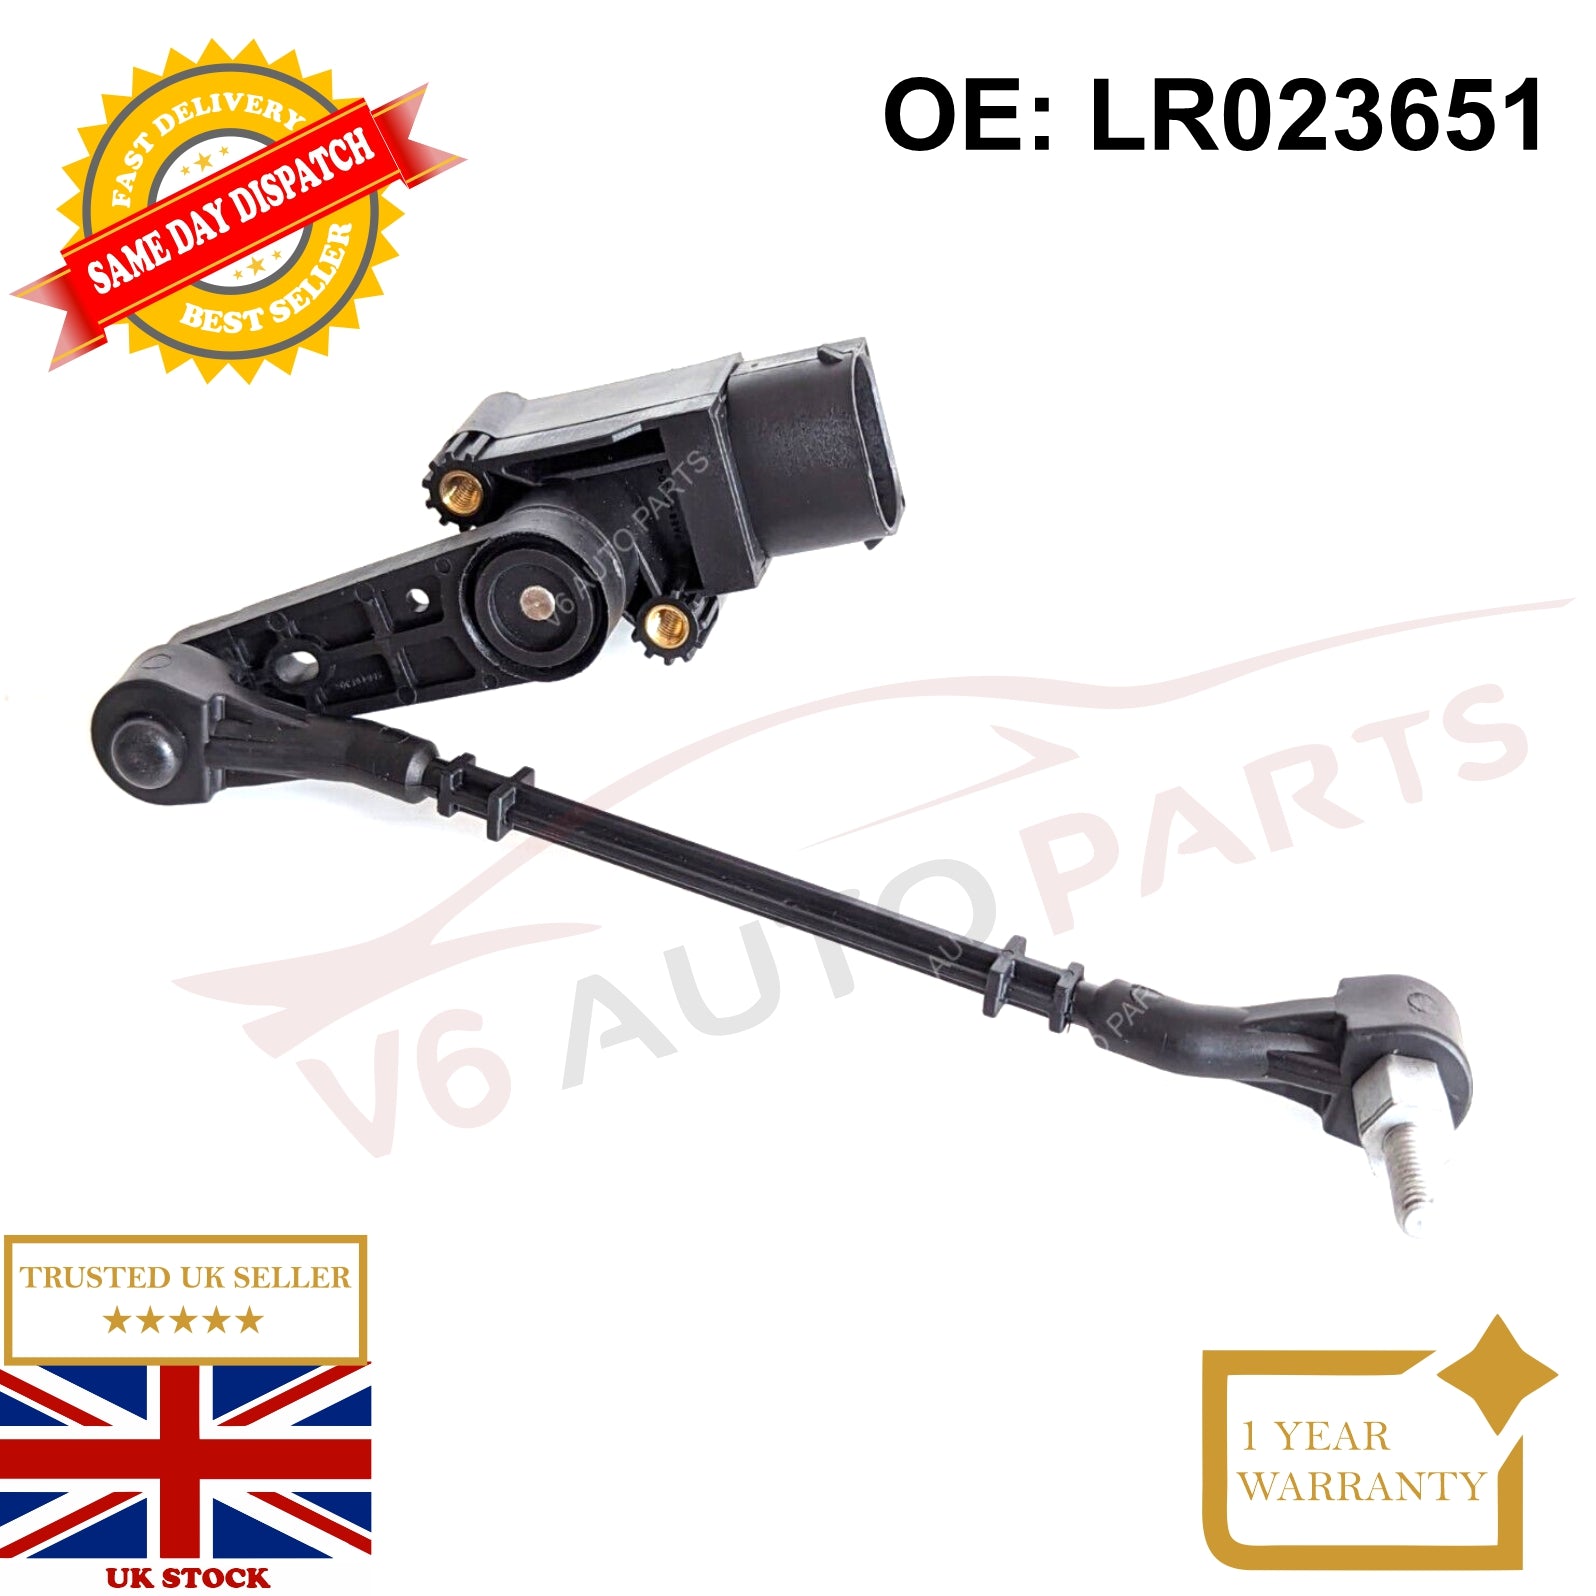 2010 - 12 Range Rover Headlight Sensor With Continuous Variable Damping LR023651